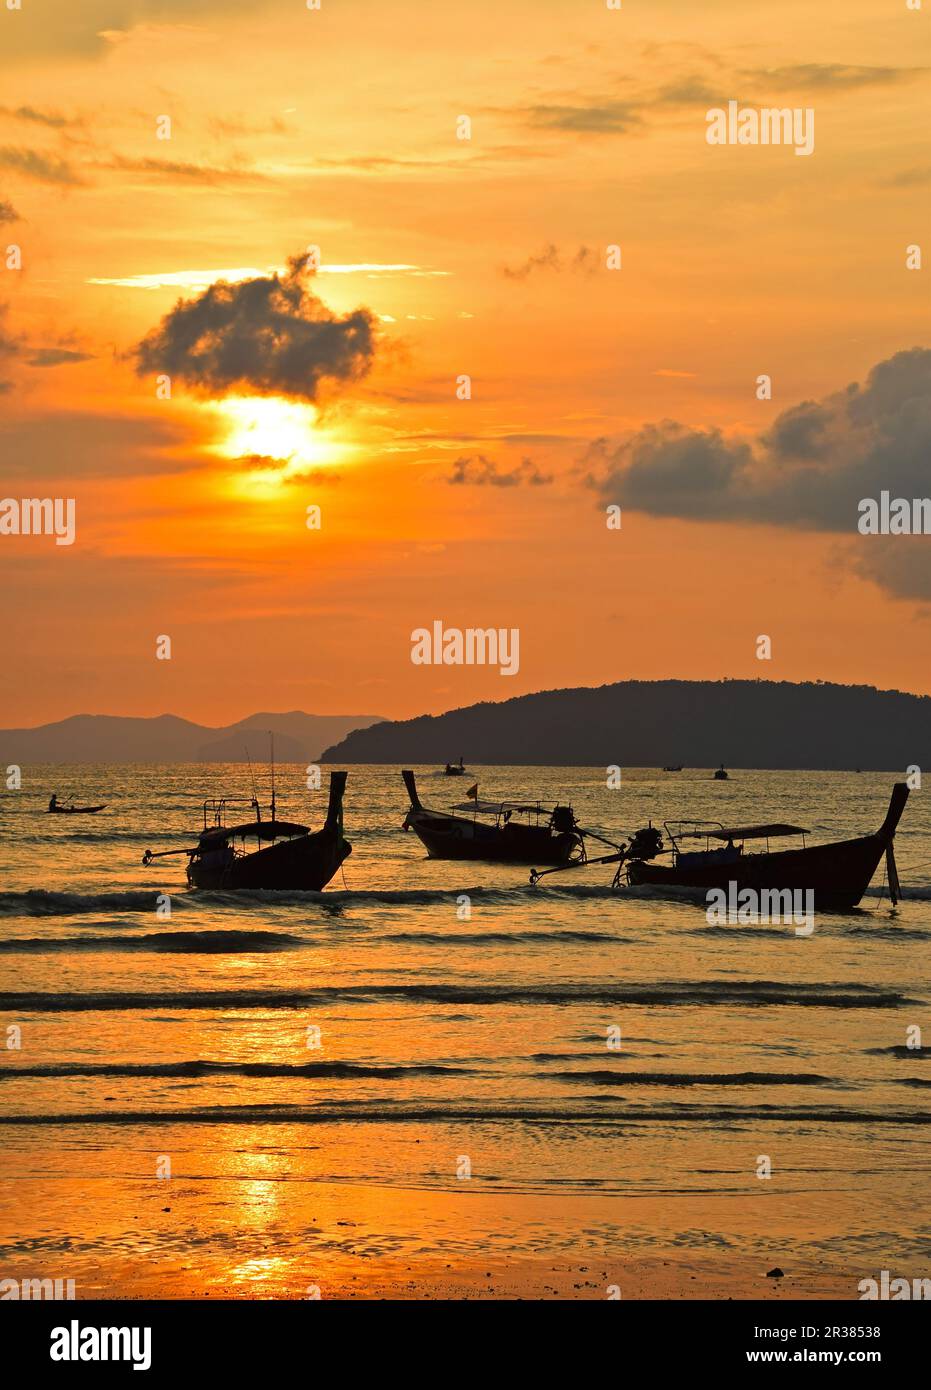 Traditional Thailand long tail boats at sunset Stock Photo